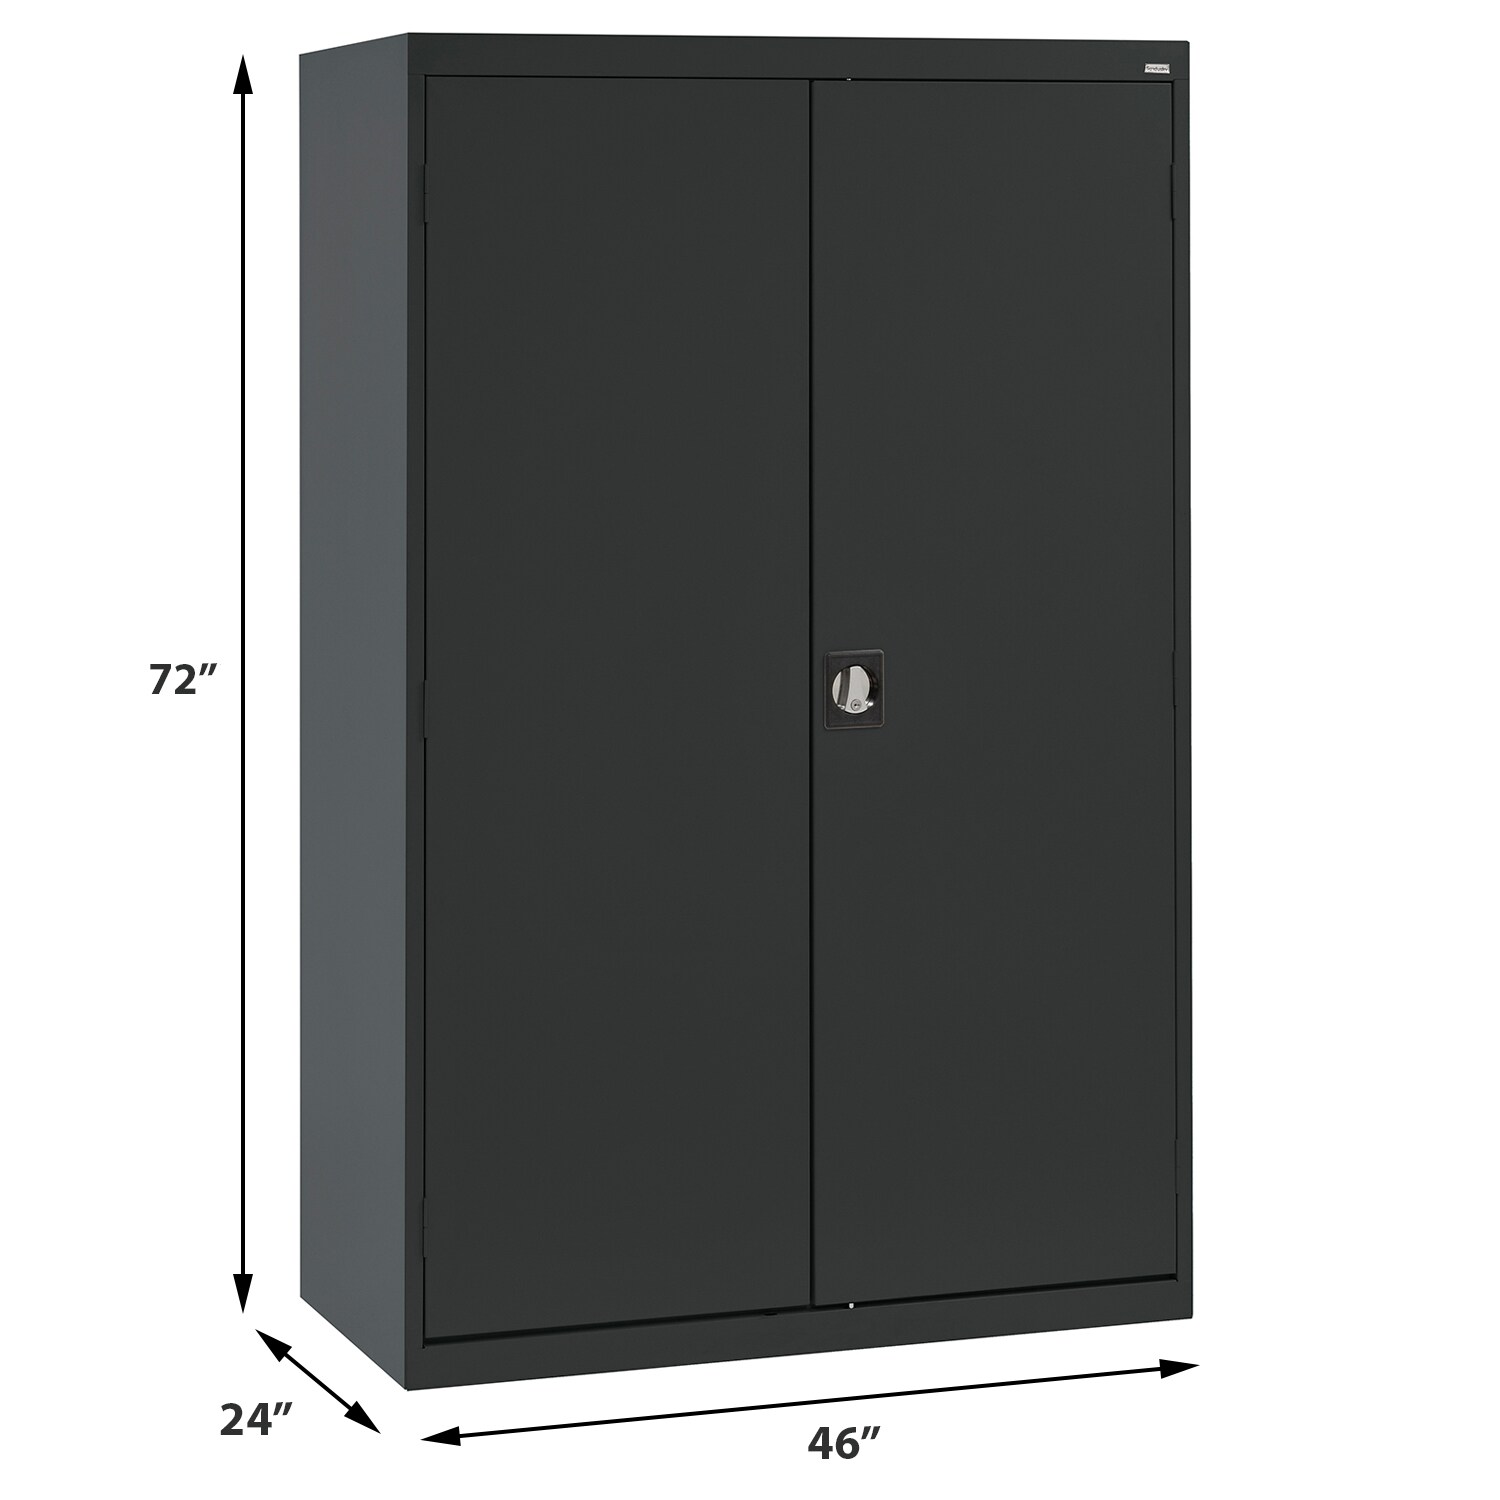 Strong Hold Metal Storage Cabinets with Quantum Plastic Bins